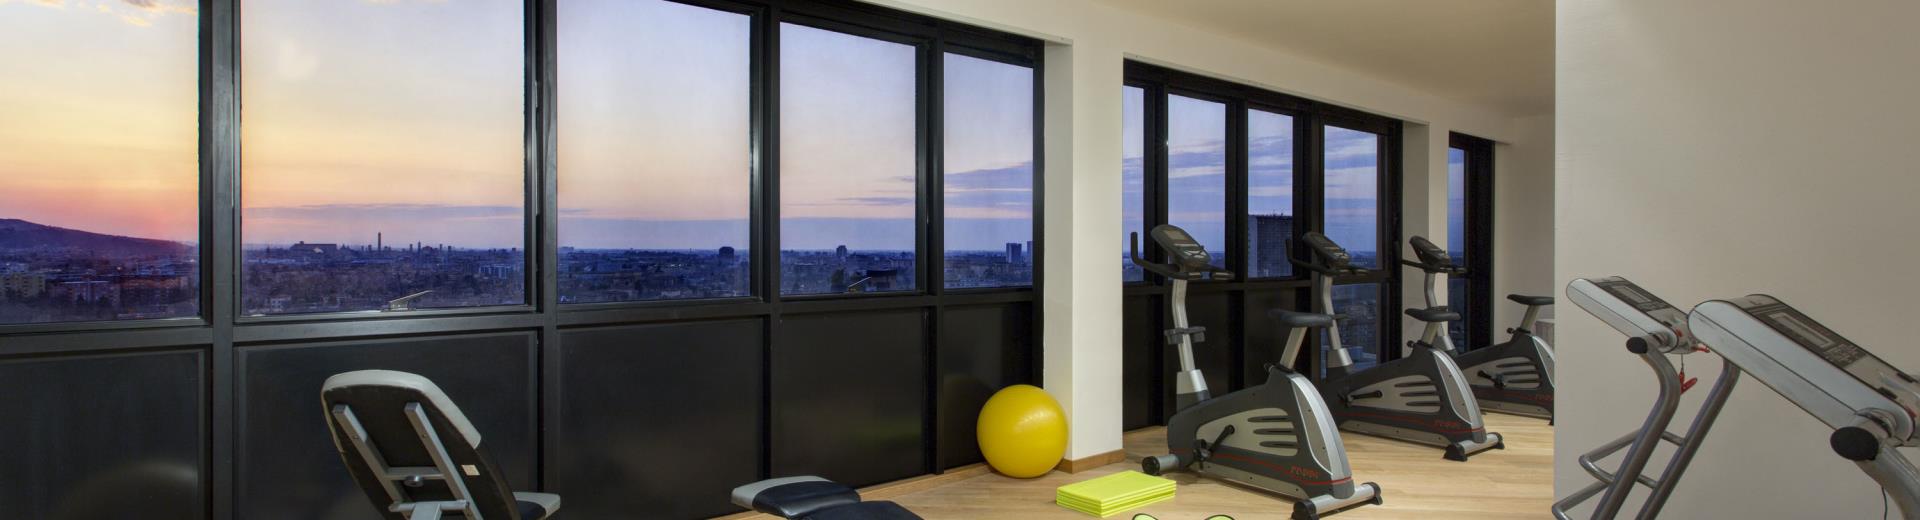 Your workout at the top floor of the hotel